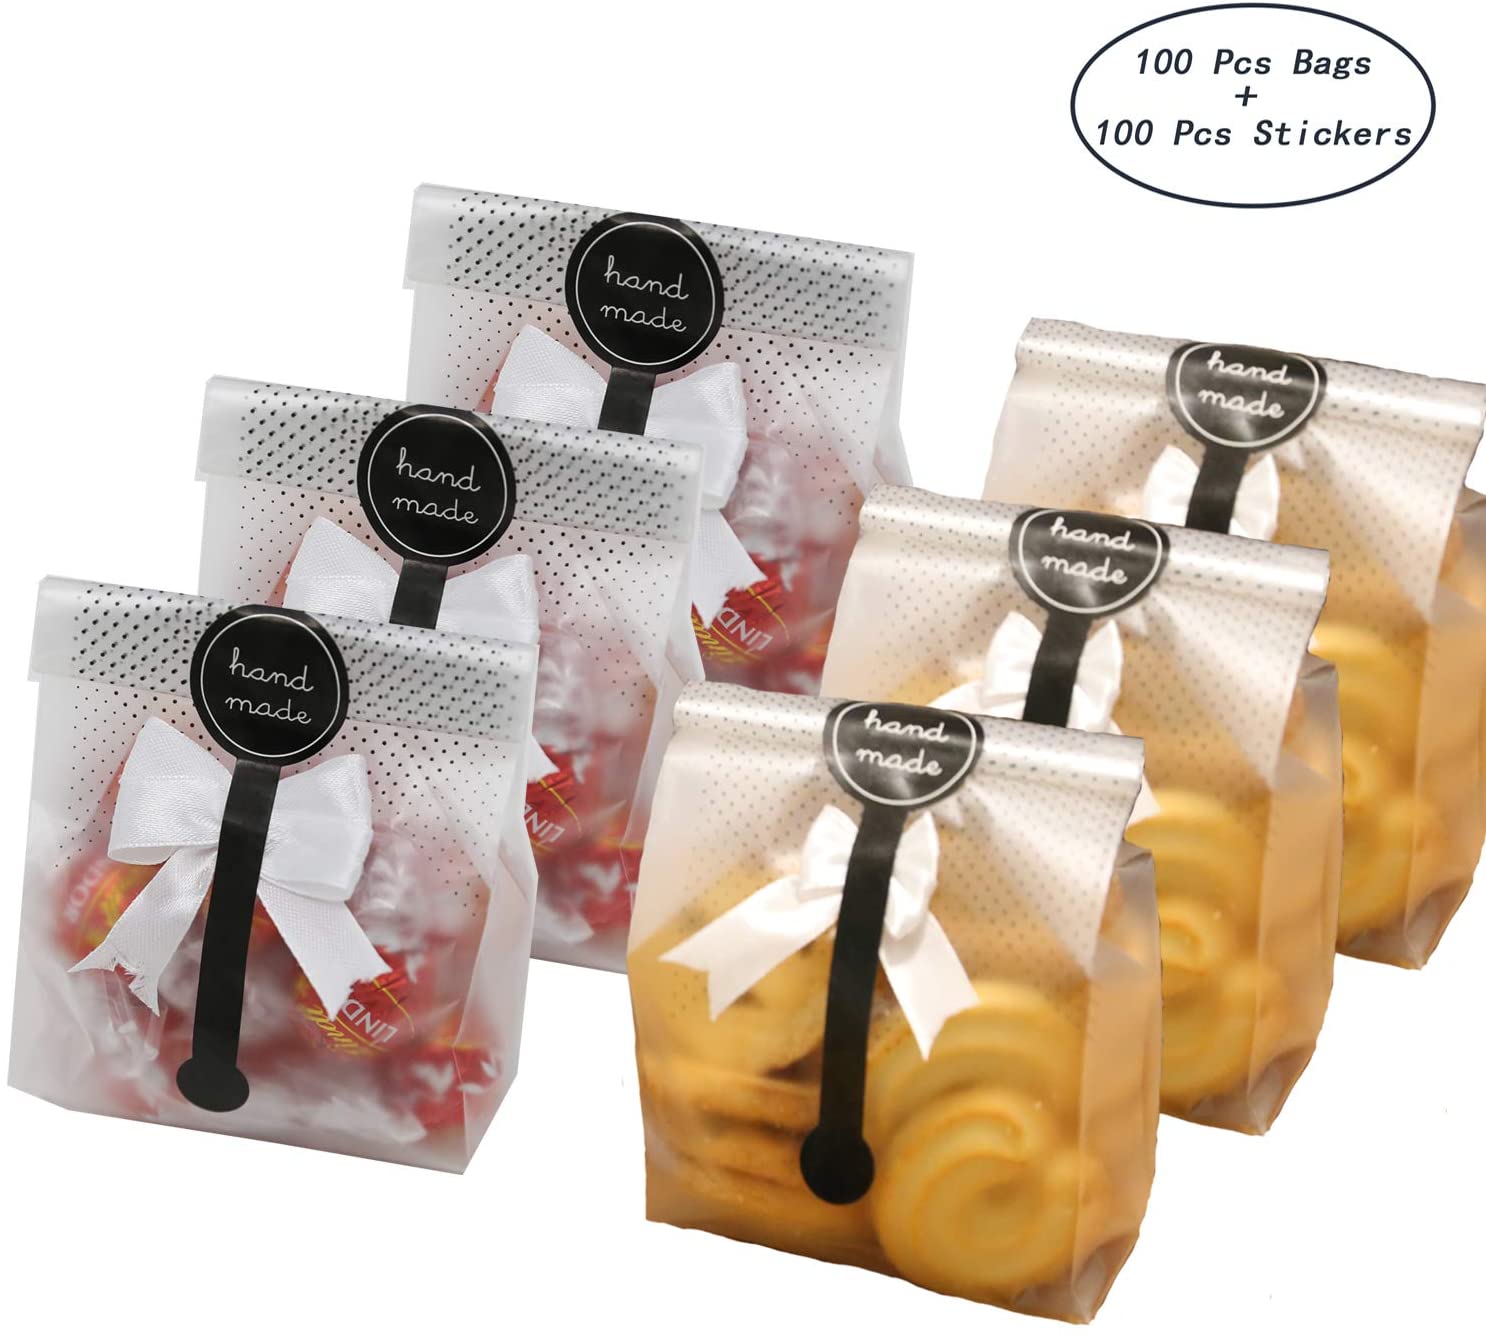 1500 Pcs 4x2x8 Clear Side Gusseted Poly Cello Bags Good for Candy Cookie Bakery 